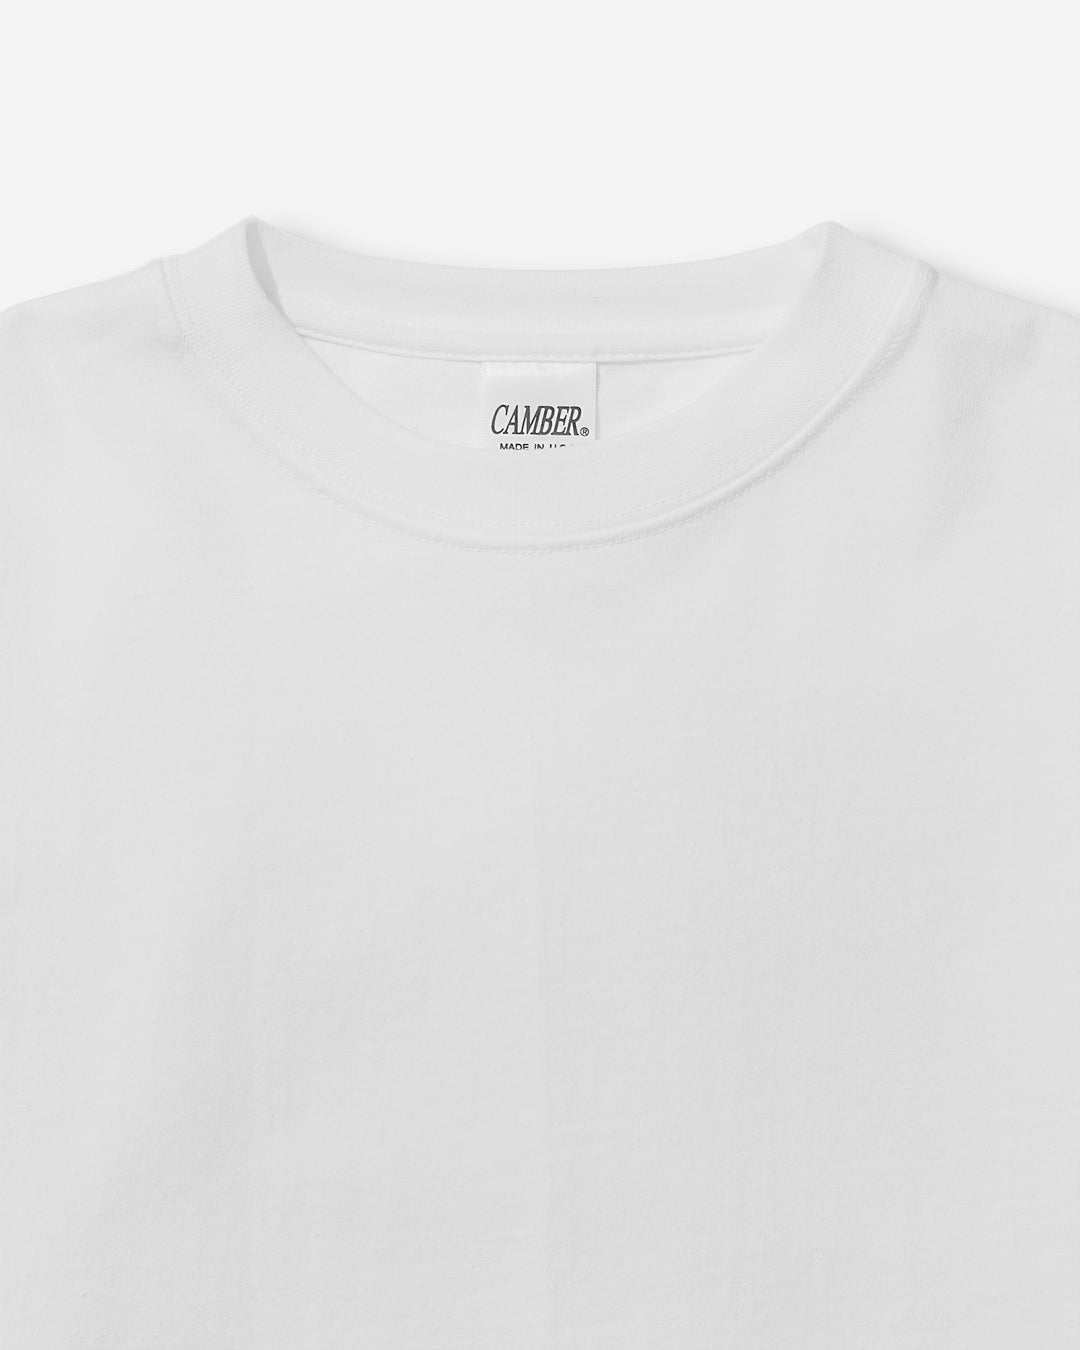 MAX-WEIGHT® Long Sleeve - White